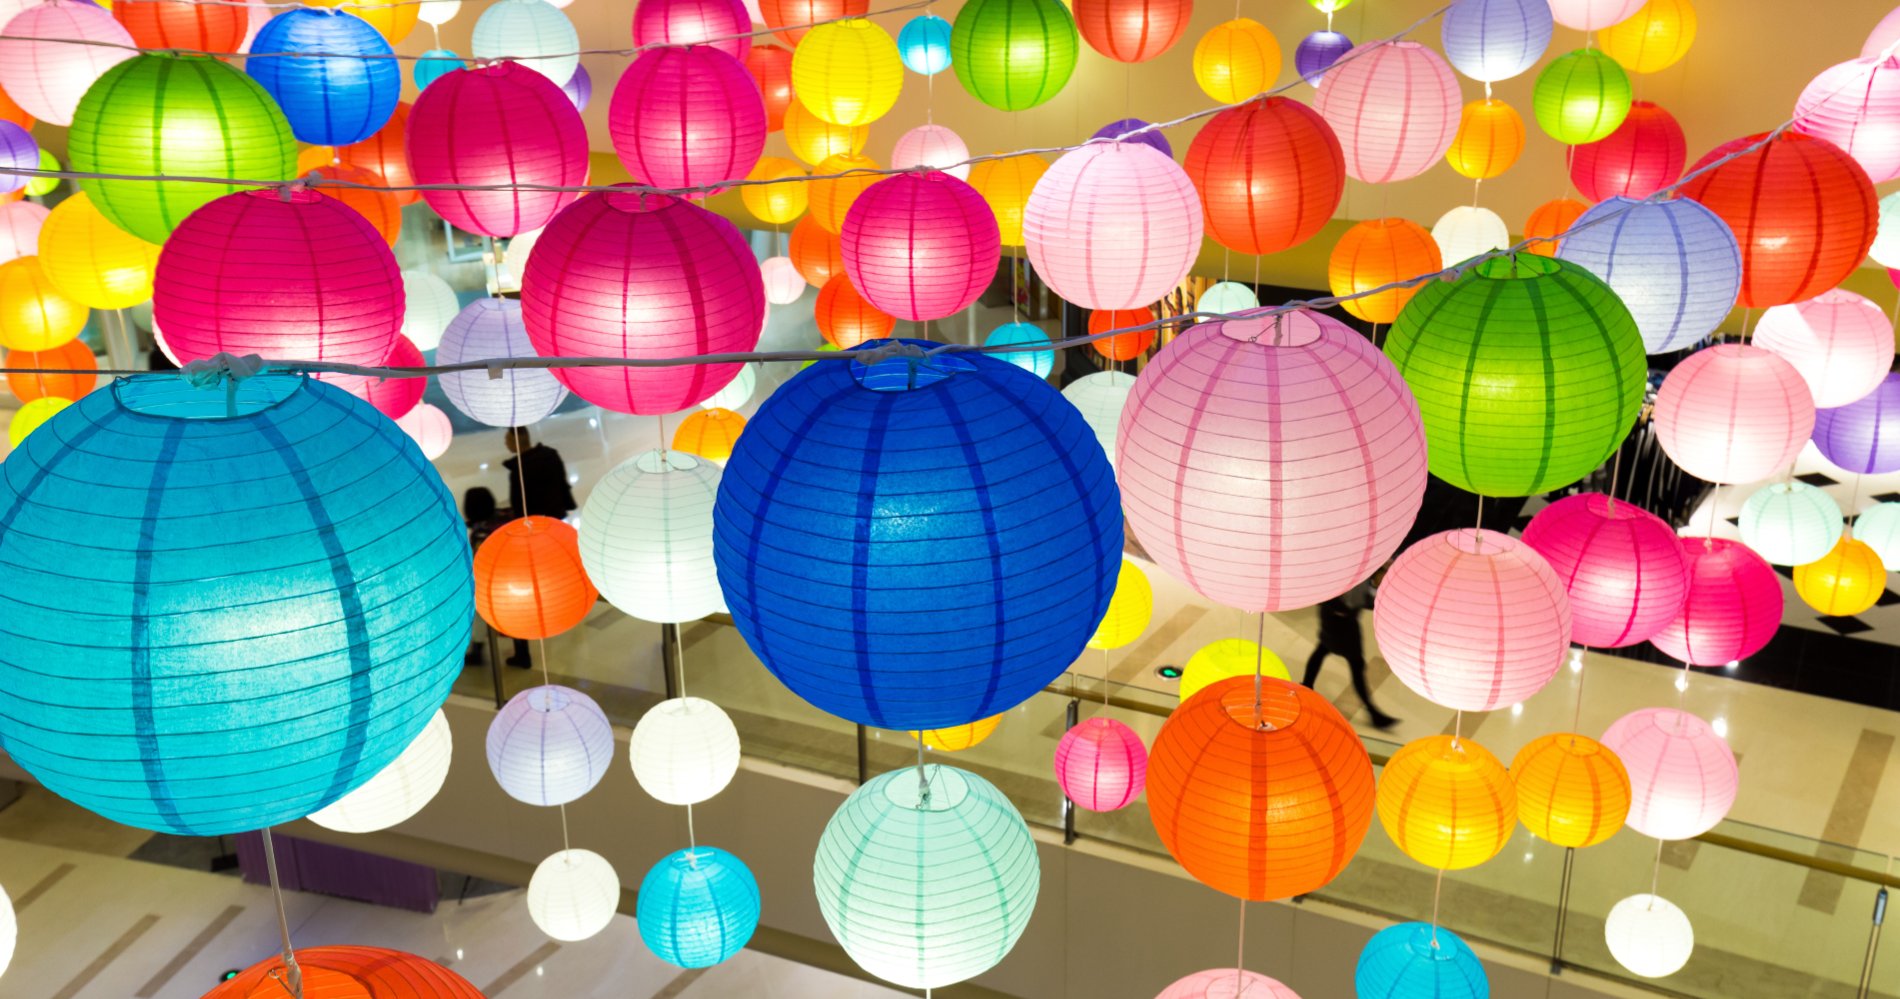 How To Hang Paper Lanterns From Ceiling
